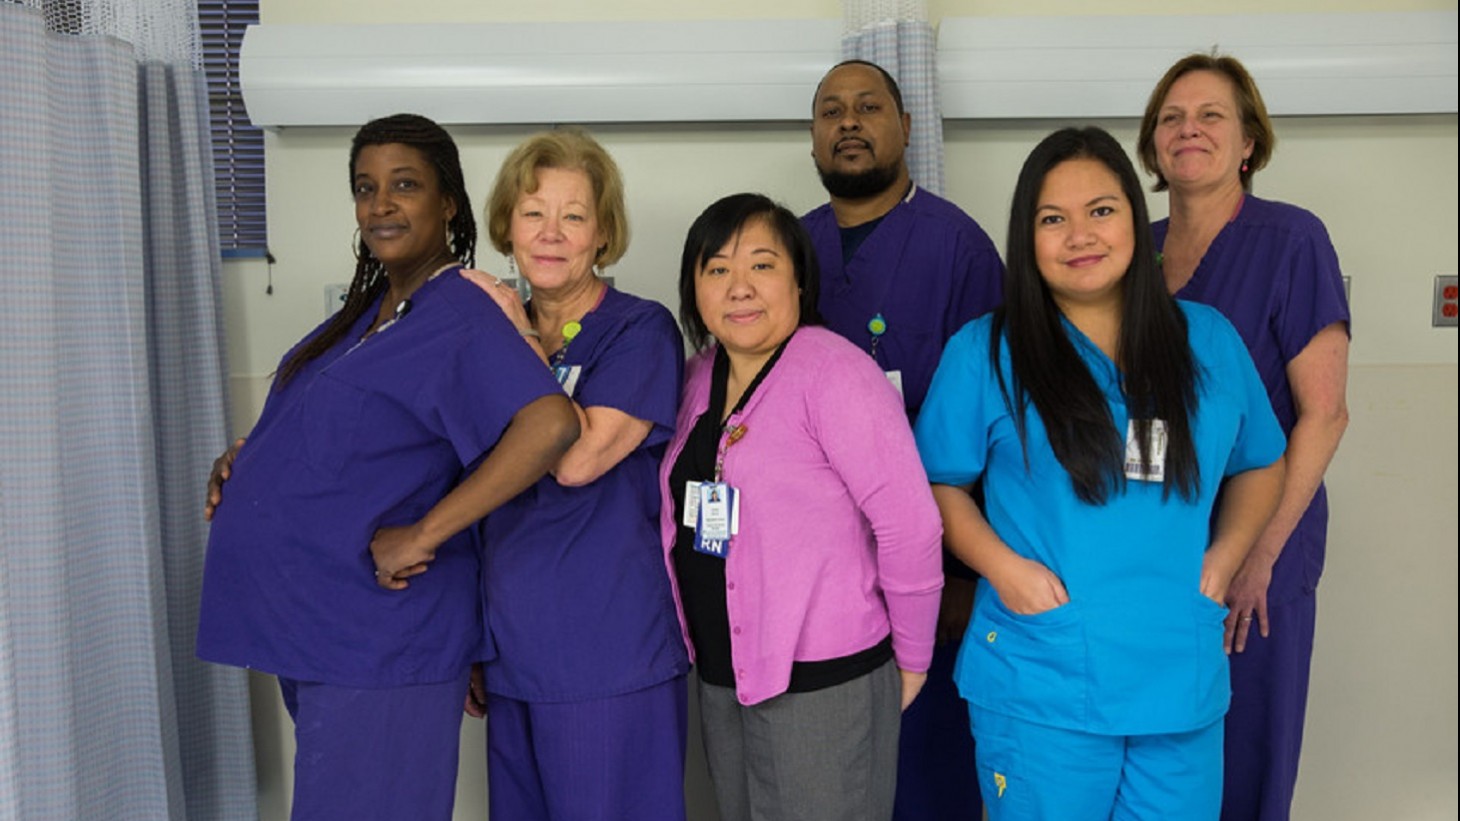 six health care workers posing in a group photo